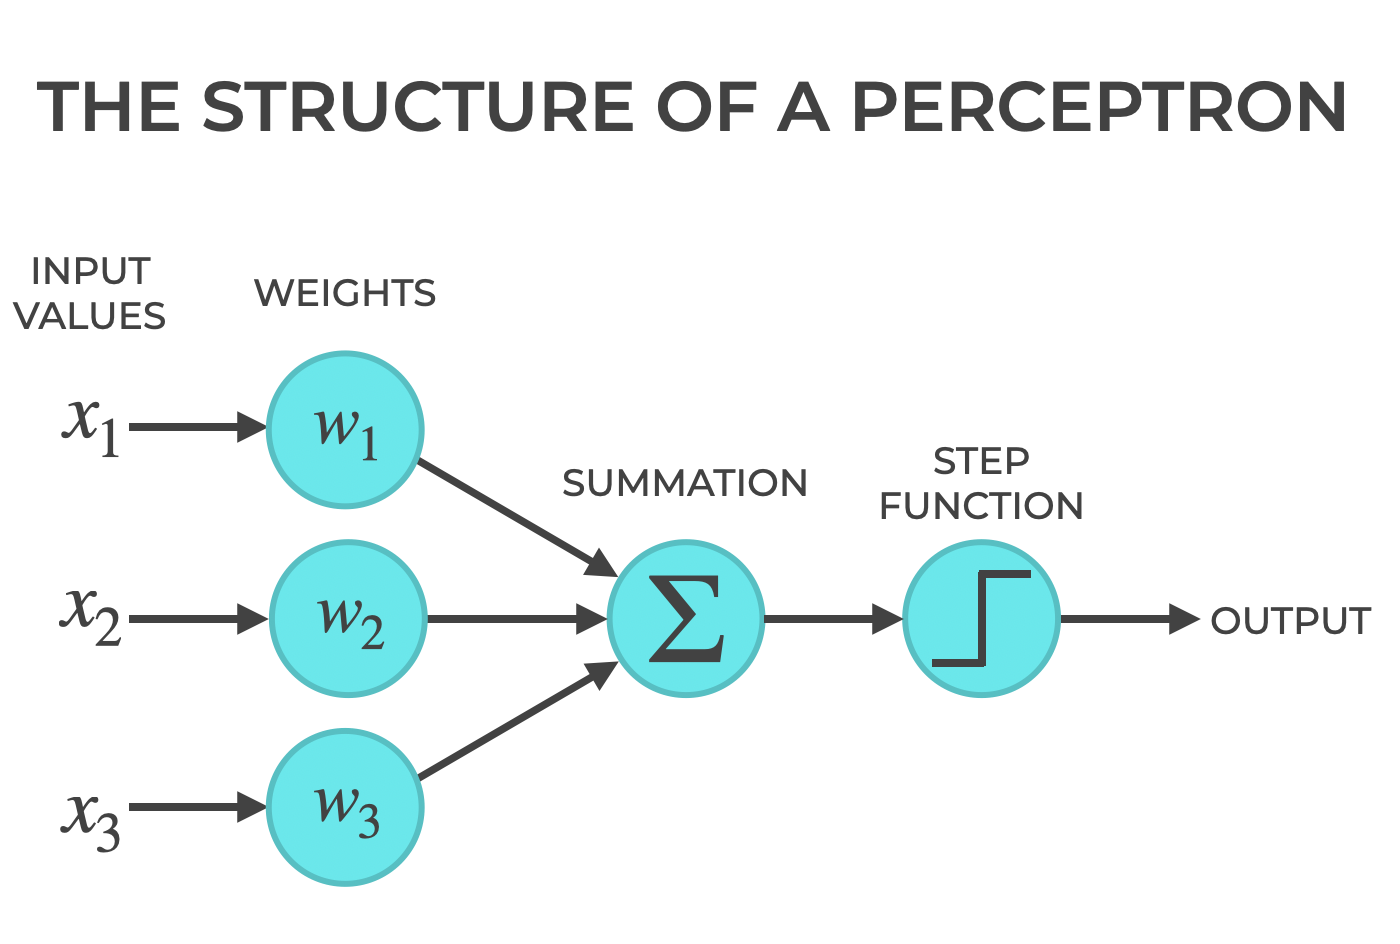 An image that visually explains the structure of a perceptron. It shows the input xi values; the associated weights, wi, the summation function that sums the weighted inputs to produce the net input; and the set activation function that produces an output.